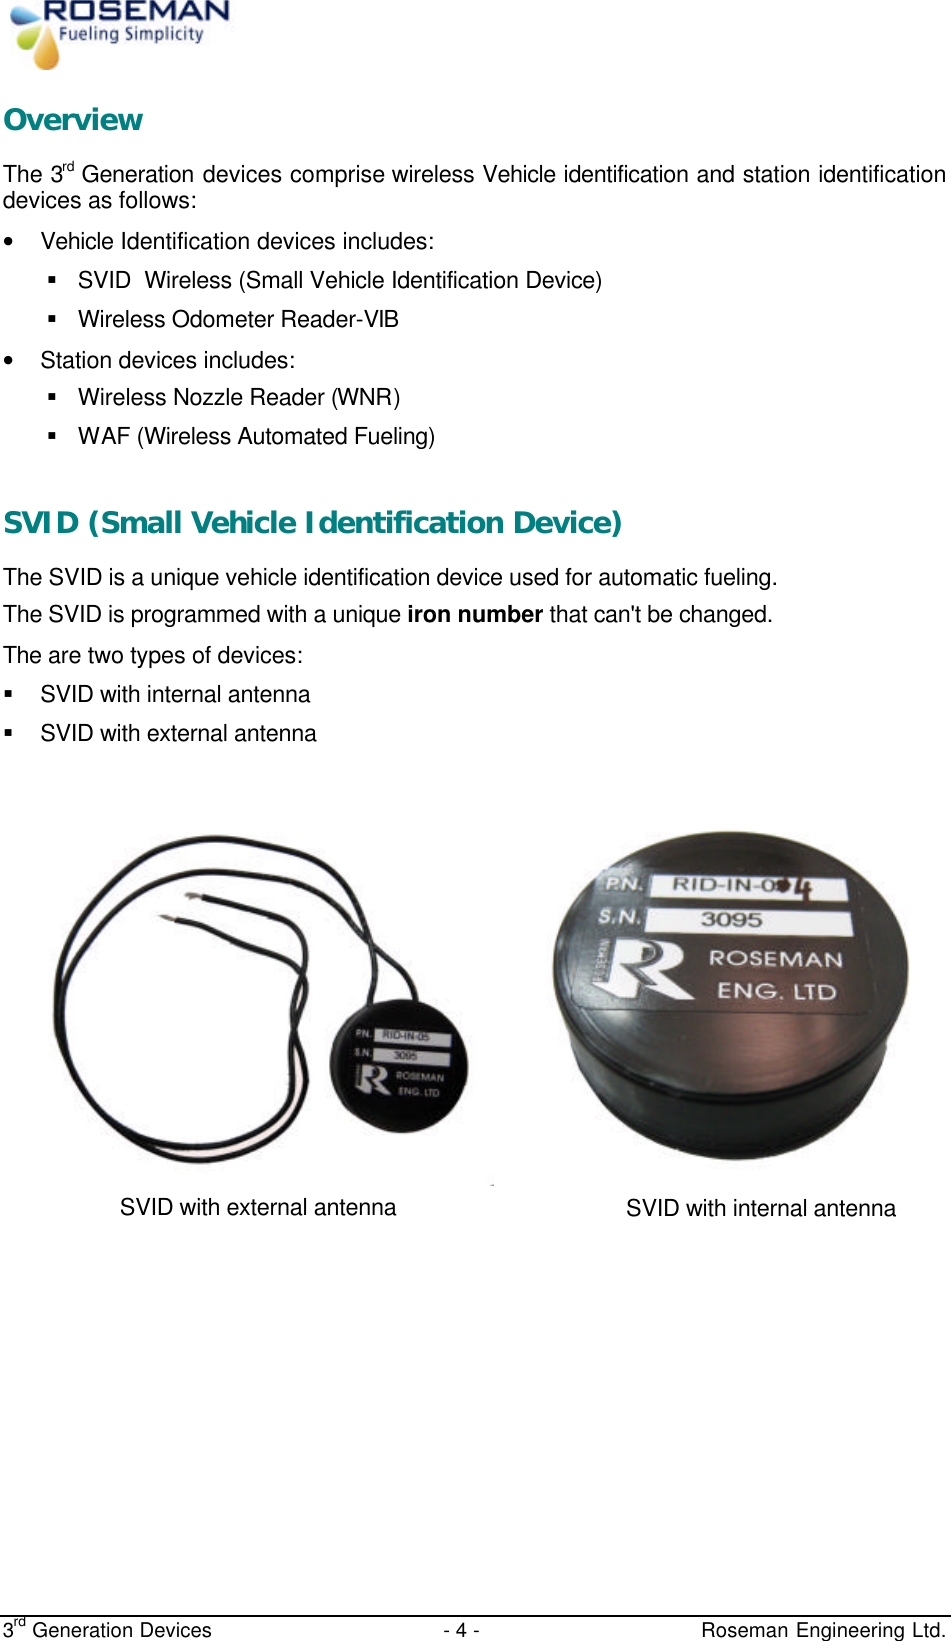  3rd Generation Devices - 4 -   Roseman Engineering Ltd. Overview The 3rd Generation devices comprise wireless Vehicle identification and station identification devices as follows: • Vehicle Identification devices includes: § SVID  Wireless (Small Vehicle Identification Device) § Wireless Odometer Reader-VIB • Station devices includes: § Wireless Nozzle Reader (WNR) § WAF (Wireless Automated Fueling)  SVID (Small Vehicle Identification Device) The SVID is a unique vehicle identification device used for automatic fueling.  The SVID is programmed with a unique iron number that can&apos;t be changed. The are two types of devices: § SVID with internal antenna § SVID with external antenna            SVID with external antenna wires ANTENNA WIRES SVID with internal antenna 